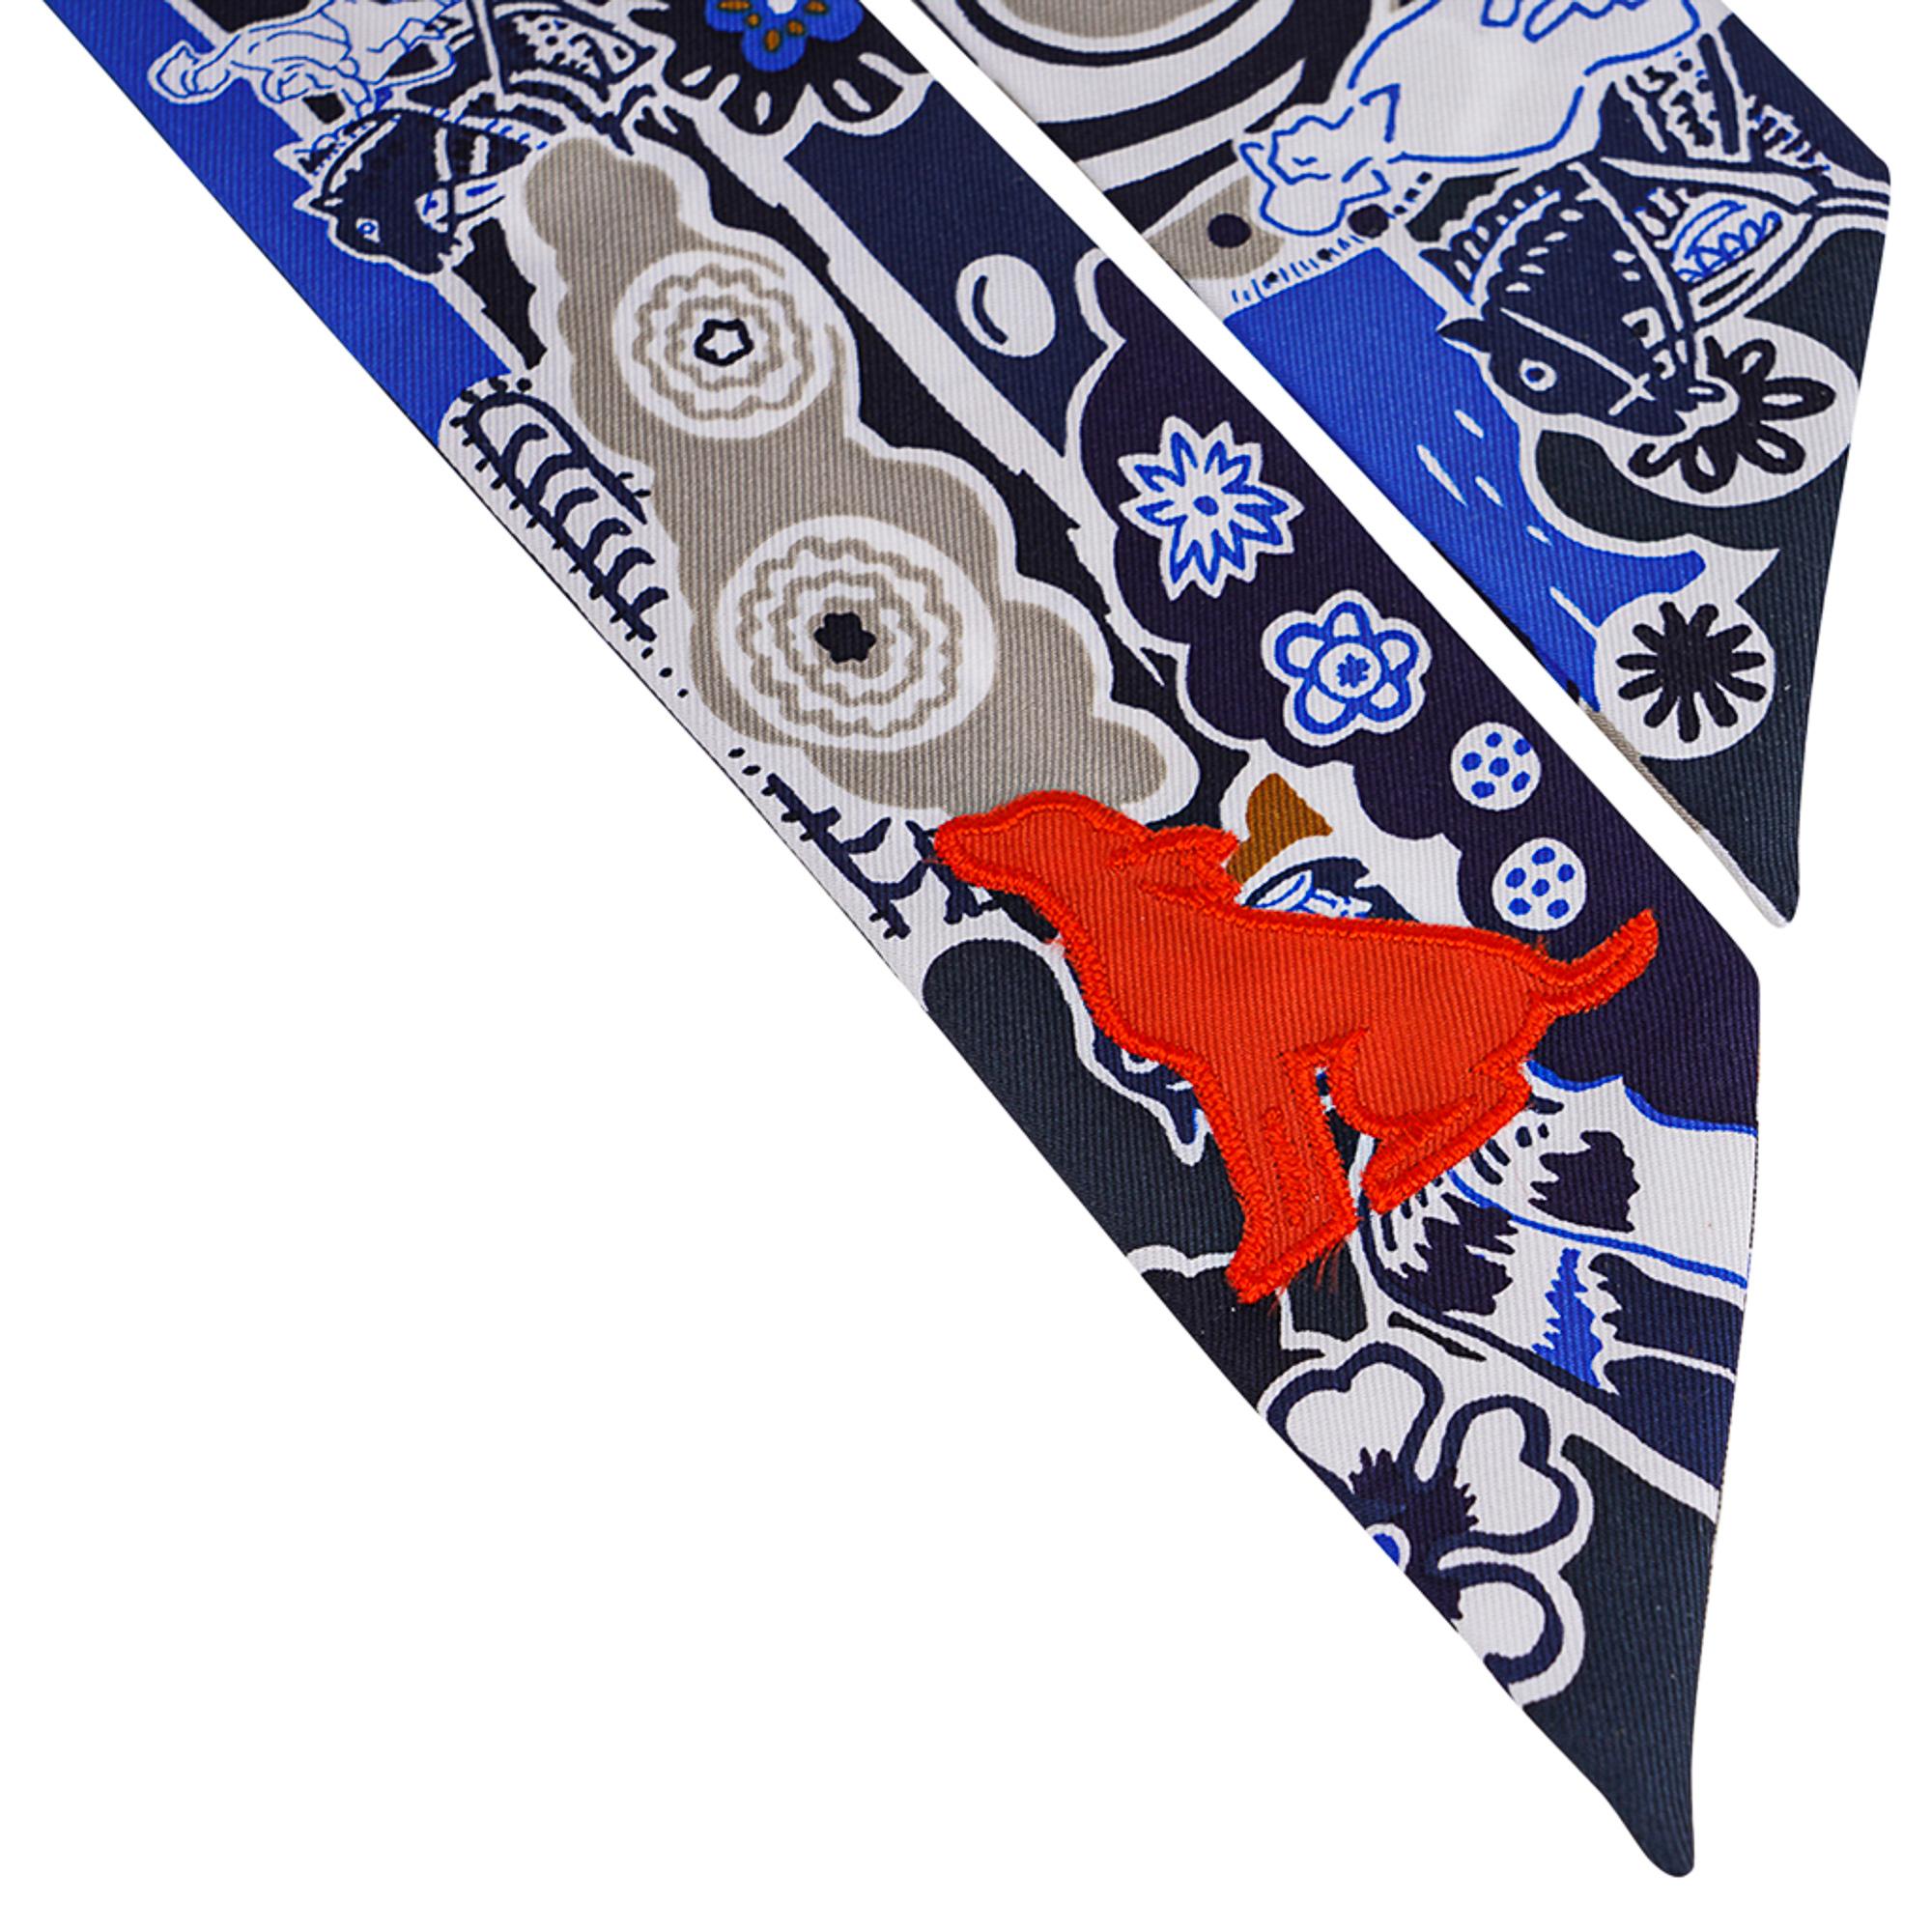 Mightychic offers an Hermes limited edition Twilly features Bingata Sticker in Marine, Tabac, Bleu Vif.
A silk orange sitting dog shaped patch adds a bit of whimsy.
Sewn with satin stitch.
This iconic Hermes accessory can be worn in a myriad ways to